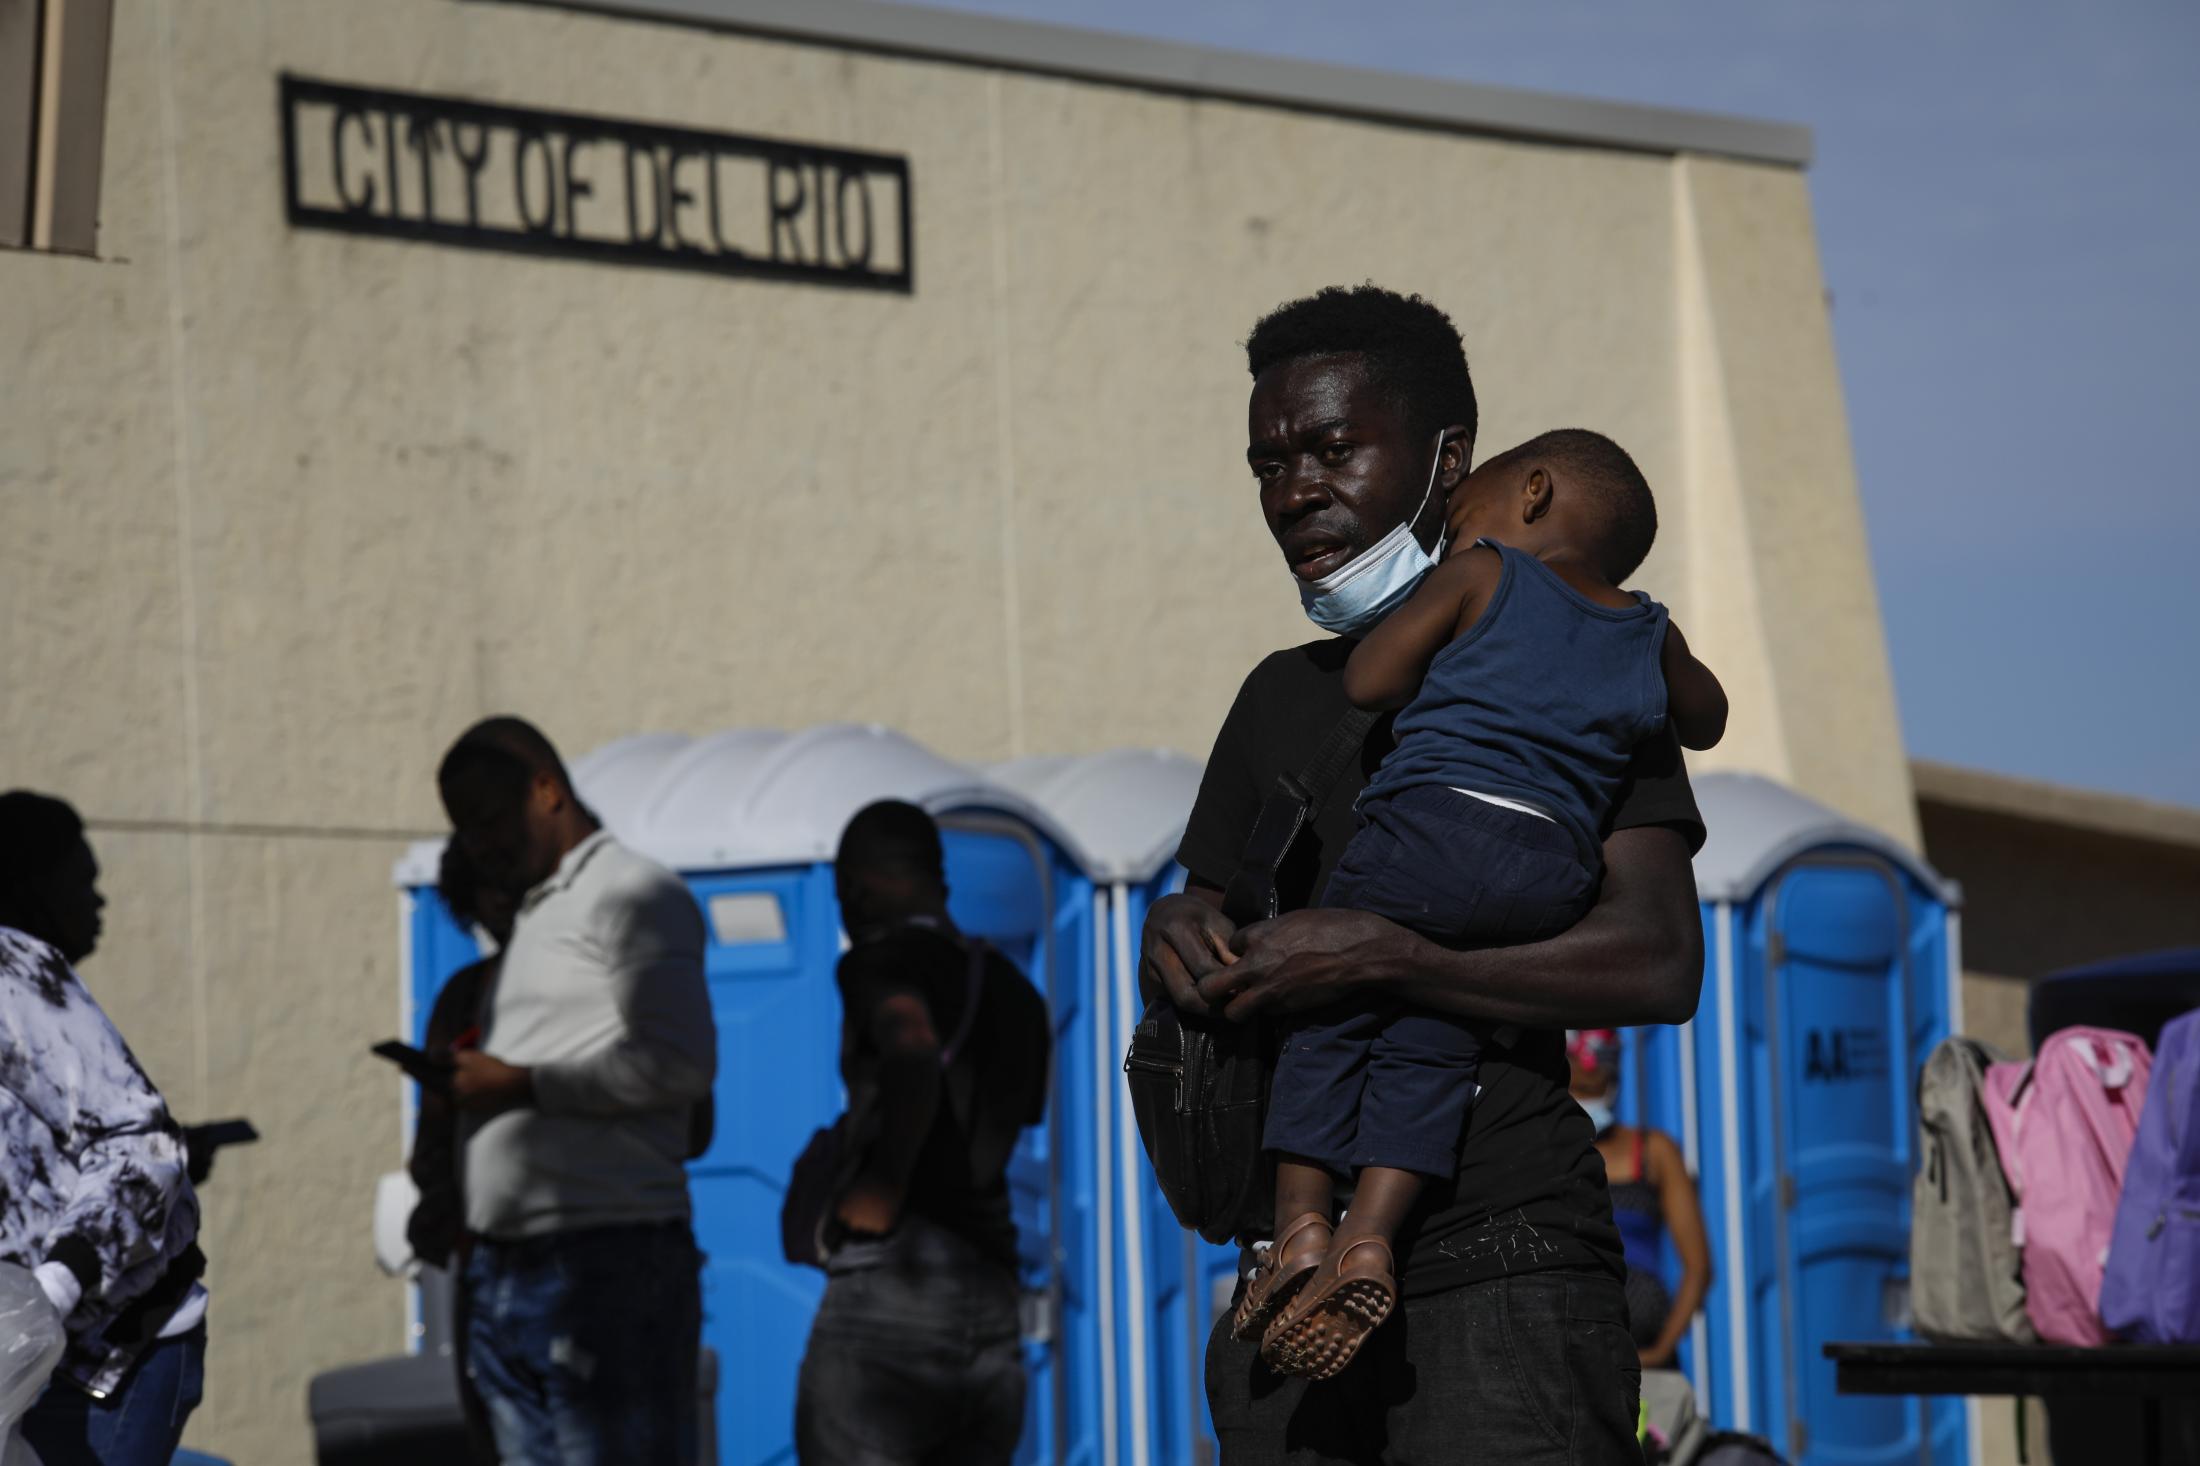 U.S. removes asylum-seeking migrants from Texas border camp - A man carries a child as he waits in line with others...